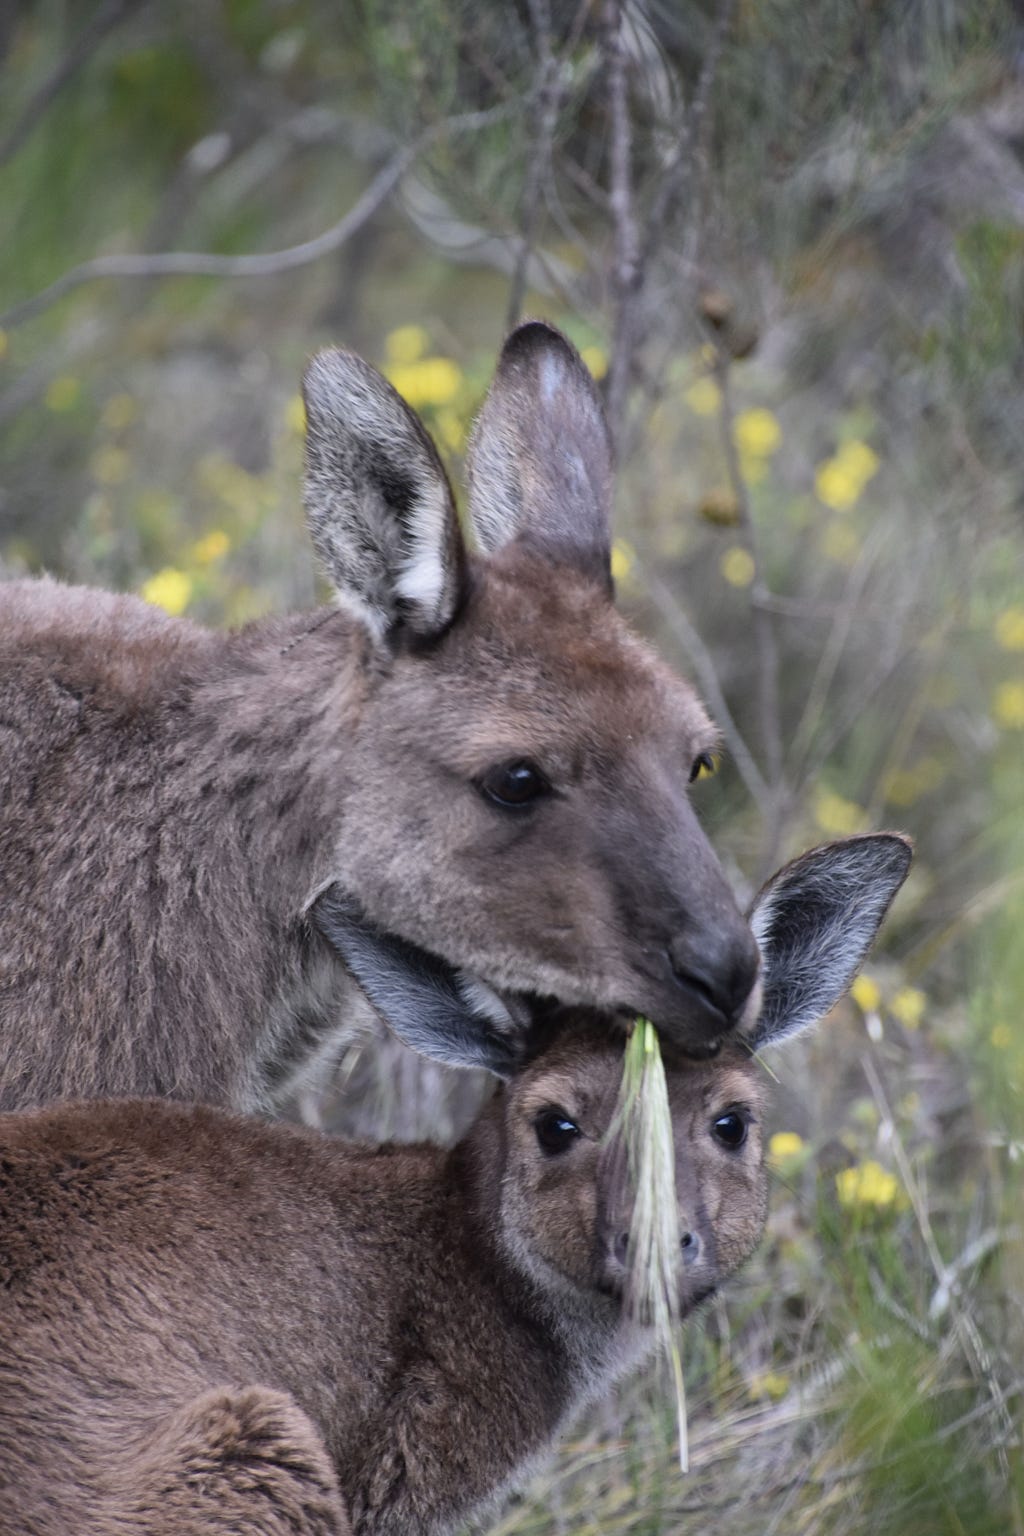 Two kangaroos, one eating grass on top of the other